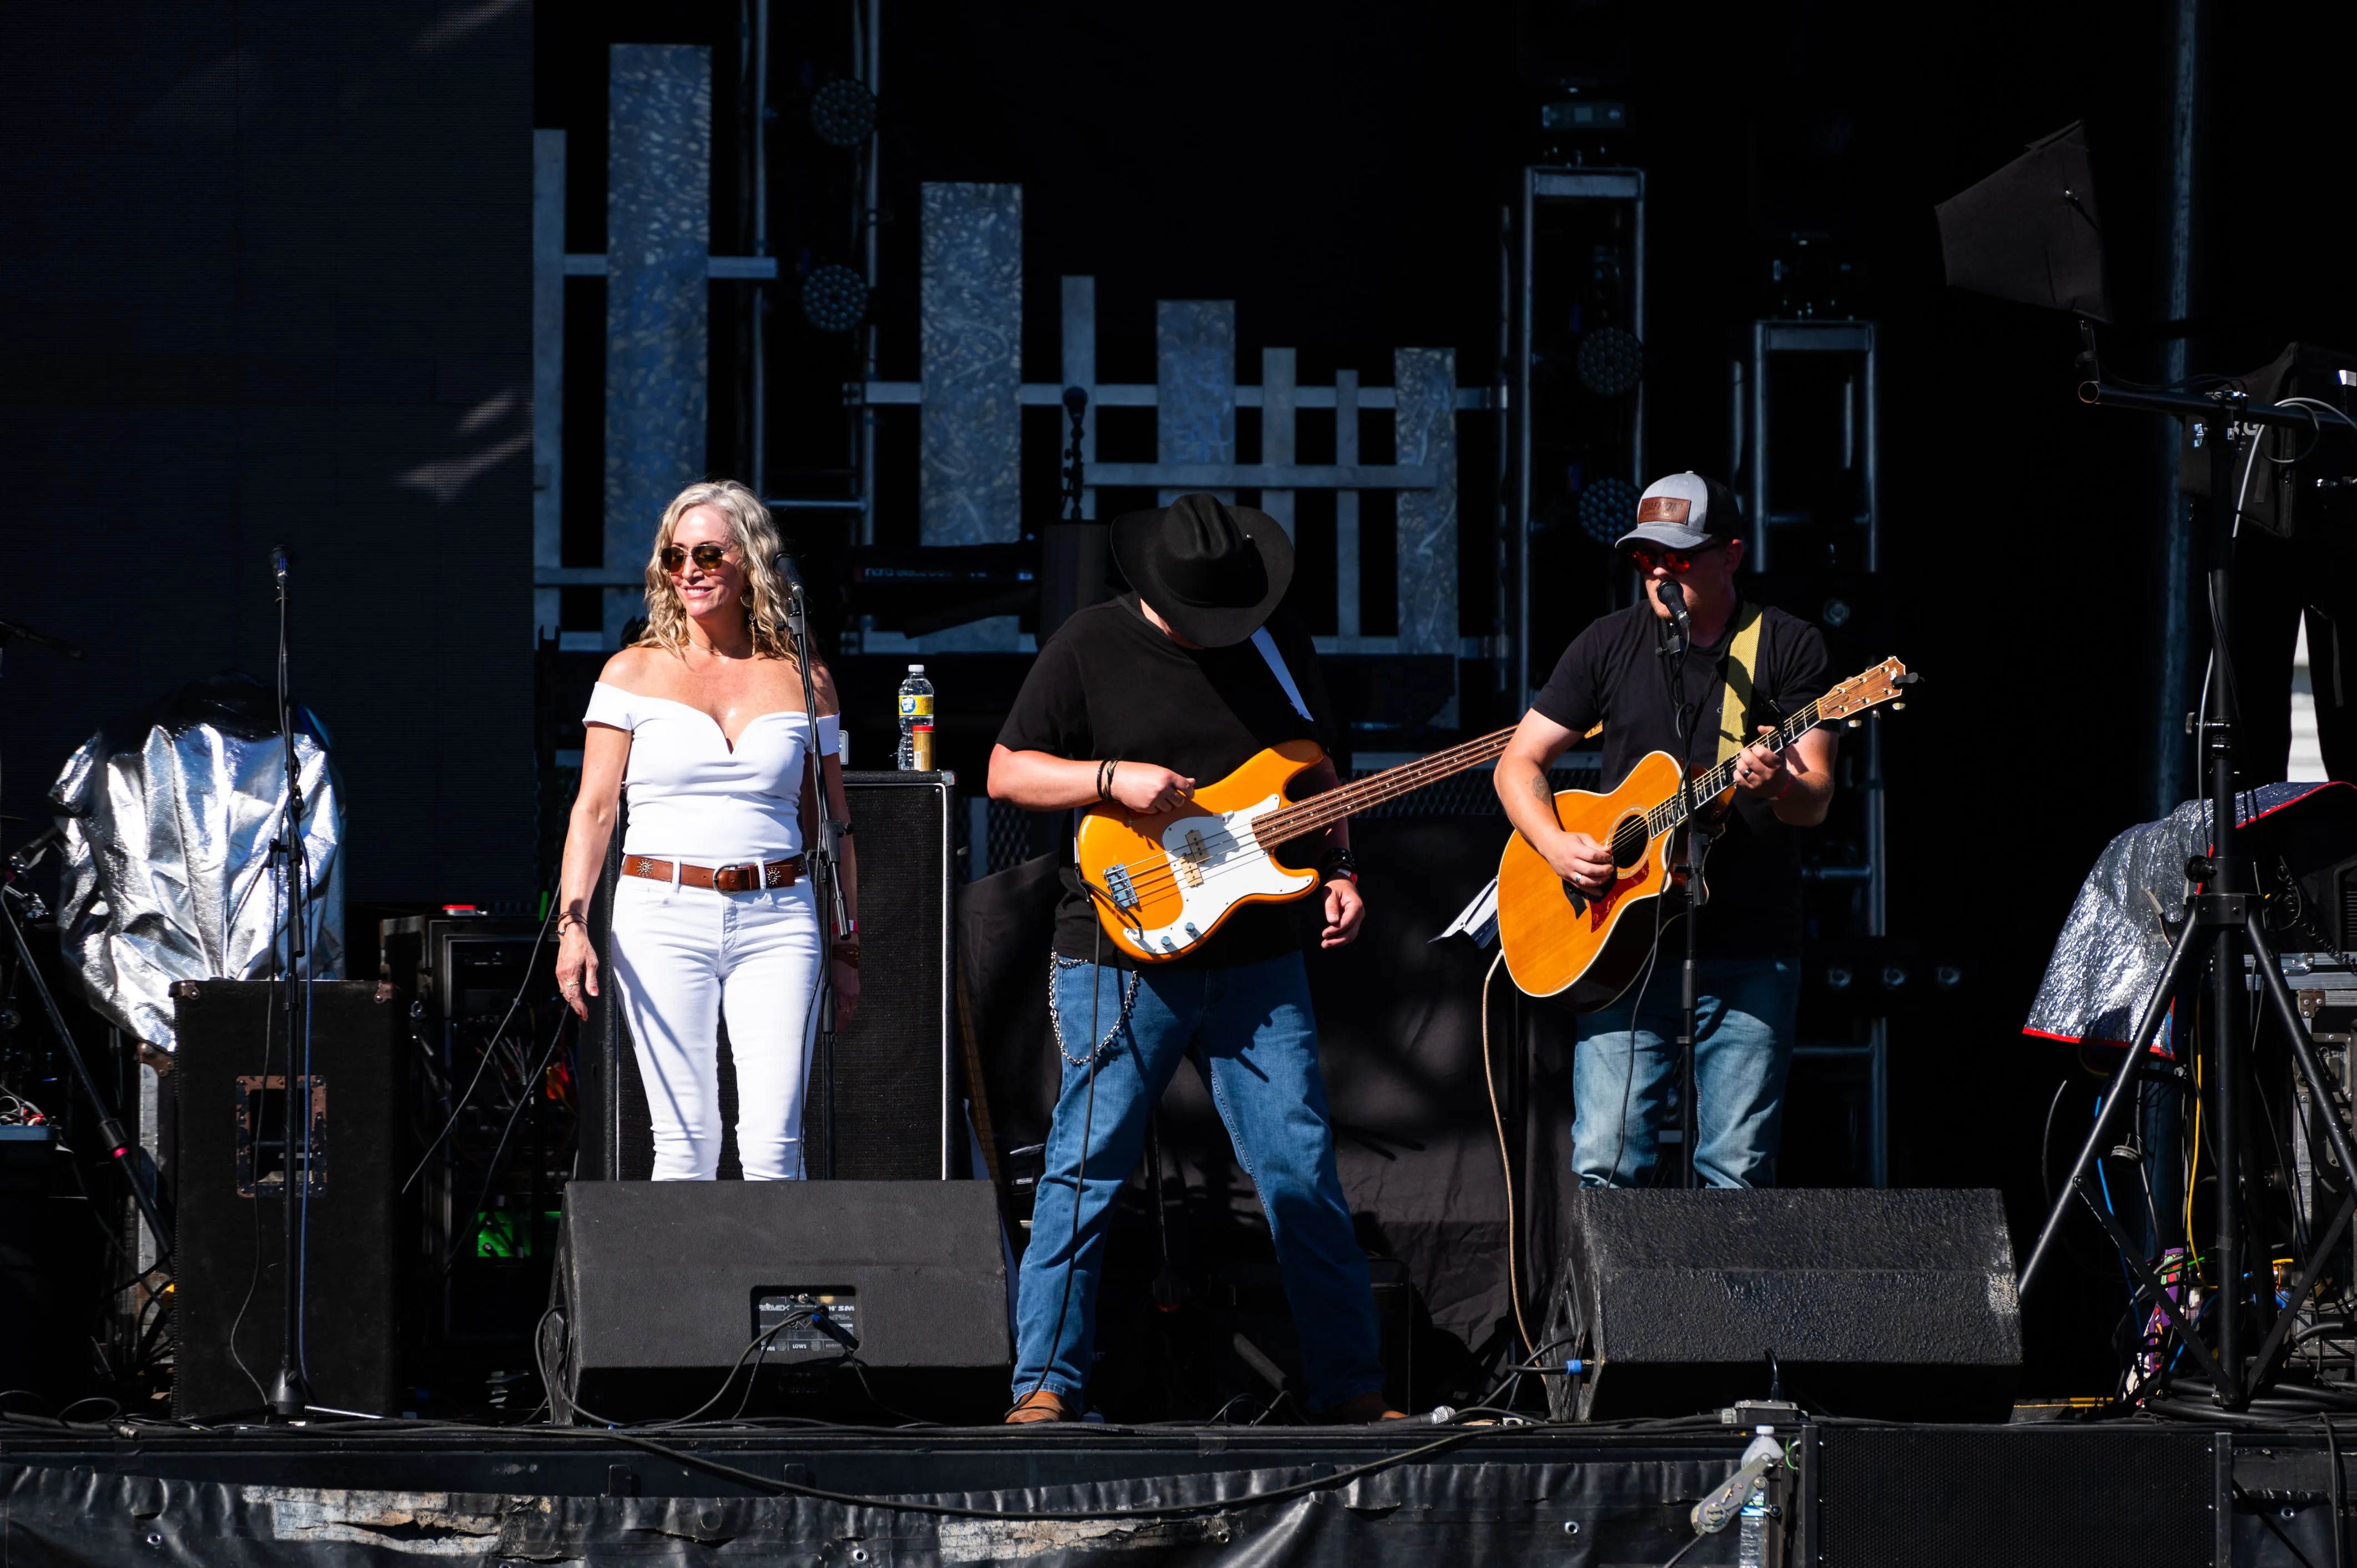 Three musicians performing on stage, with a female singer in the center and two guitarists on either side.